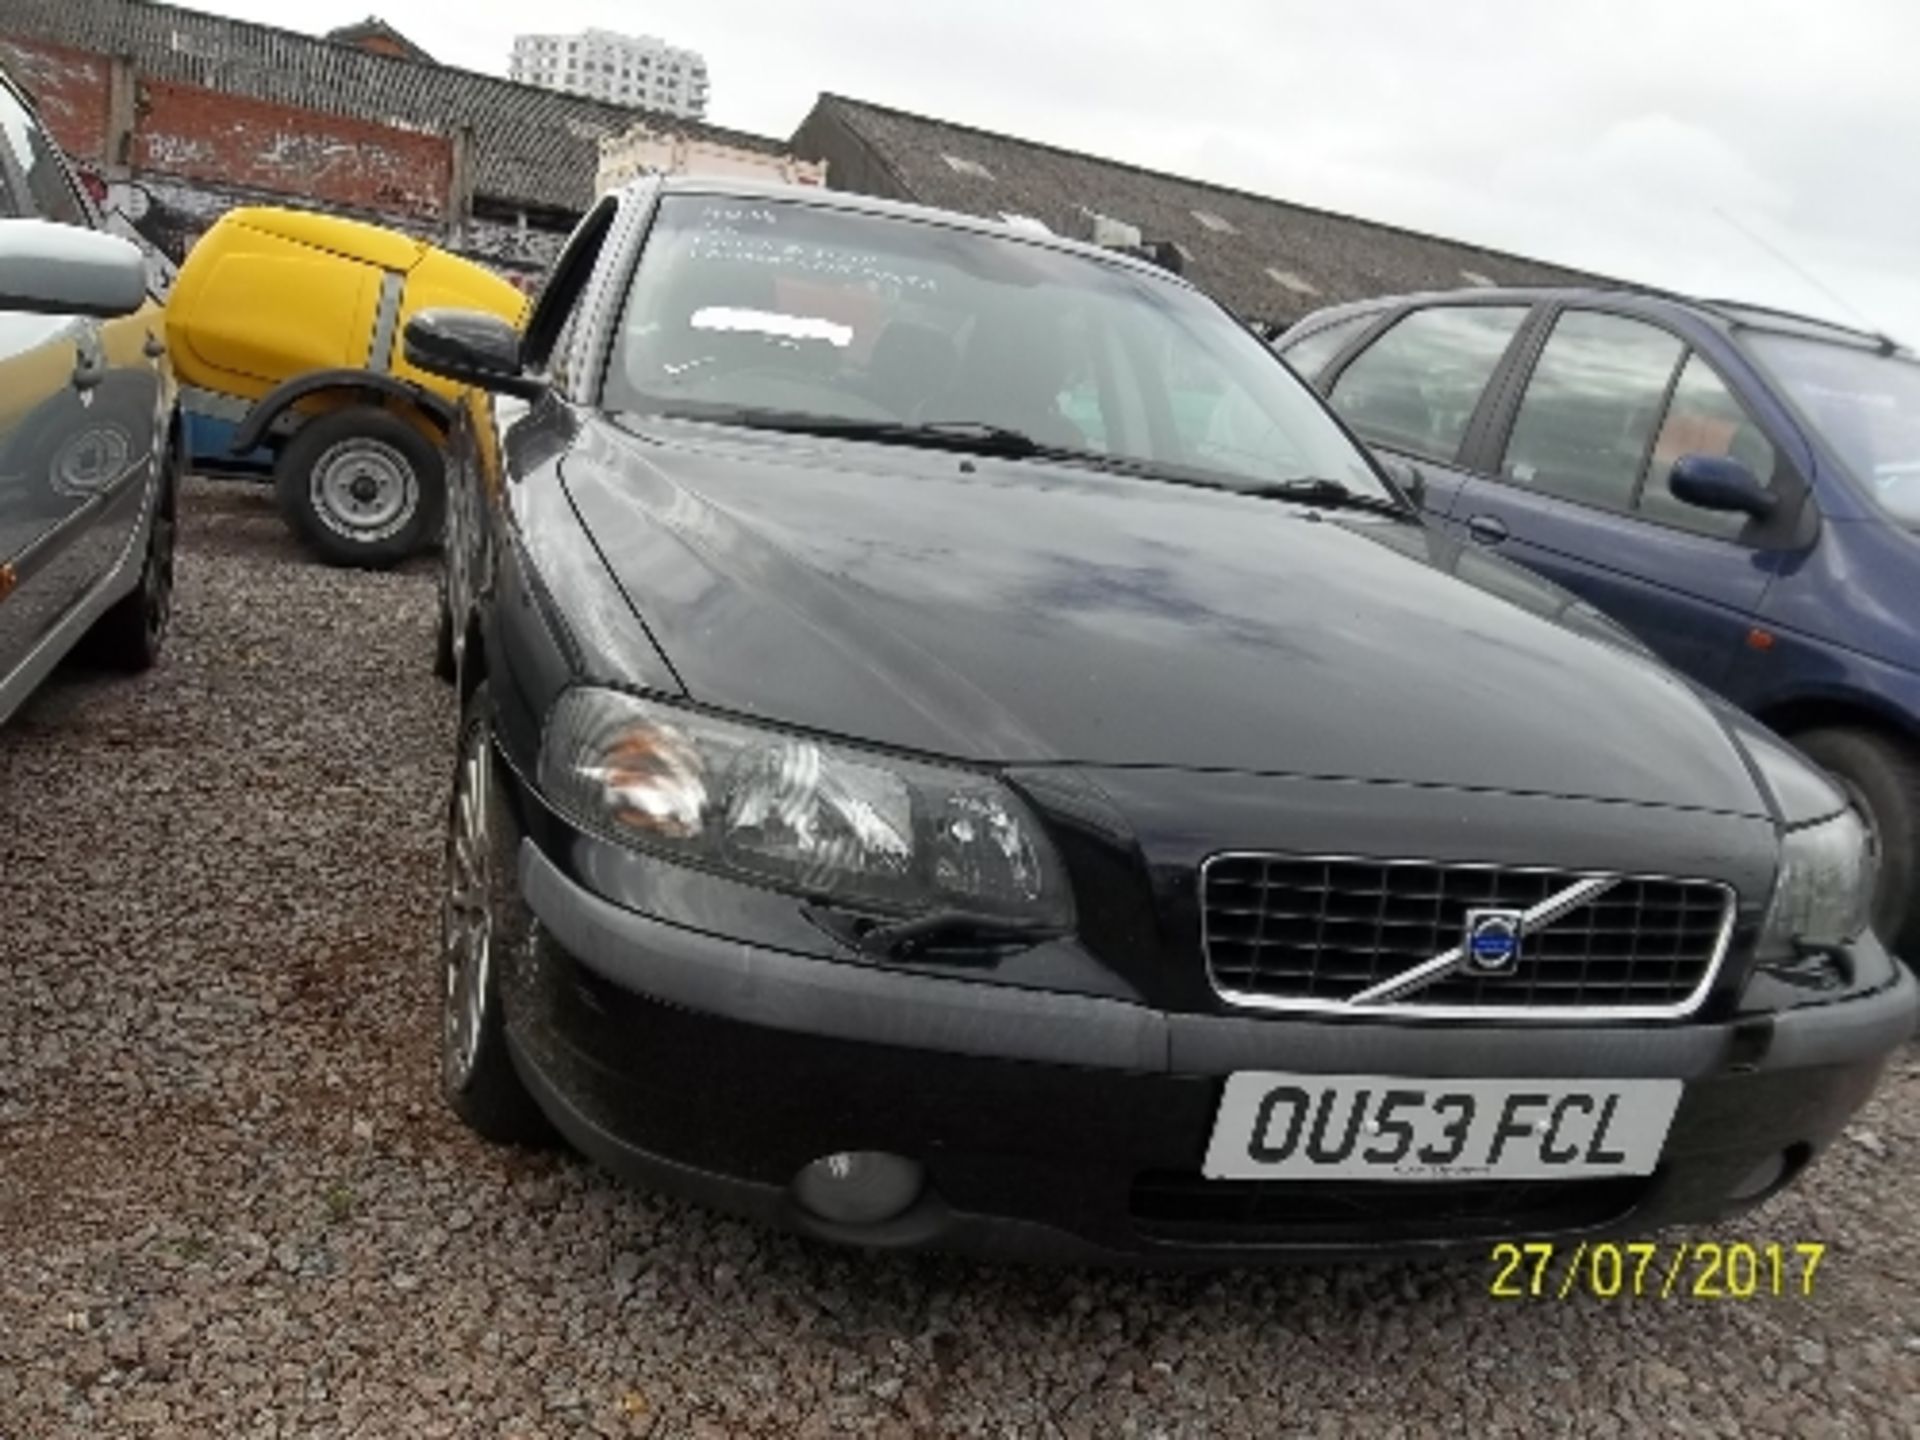 Volvo S60 SE T Geartronic - OU53 FCL Date of registration: 27.10.2003 2521cc, petrol, 5 speed